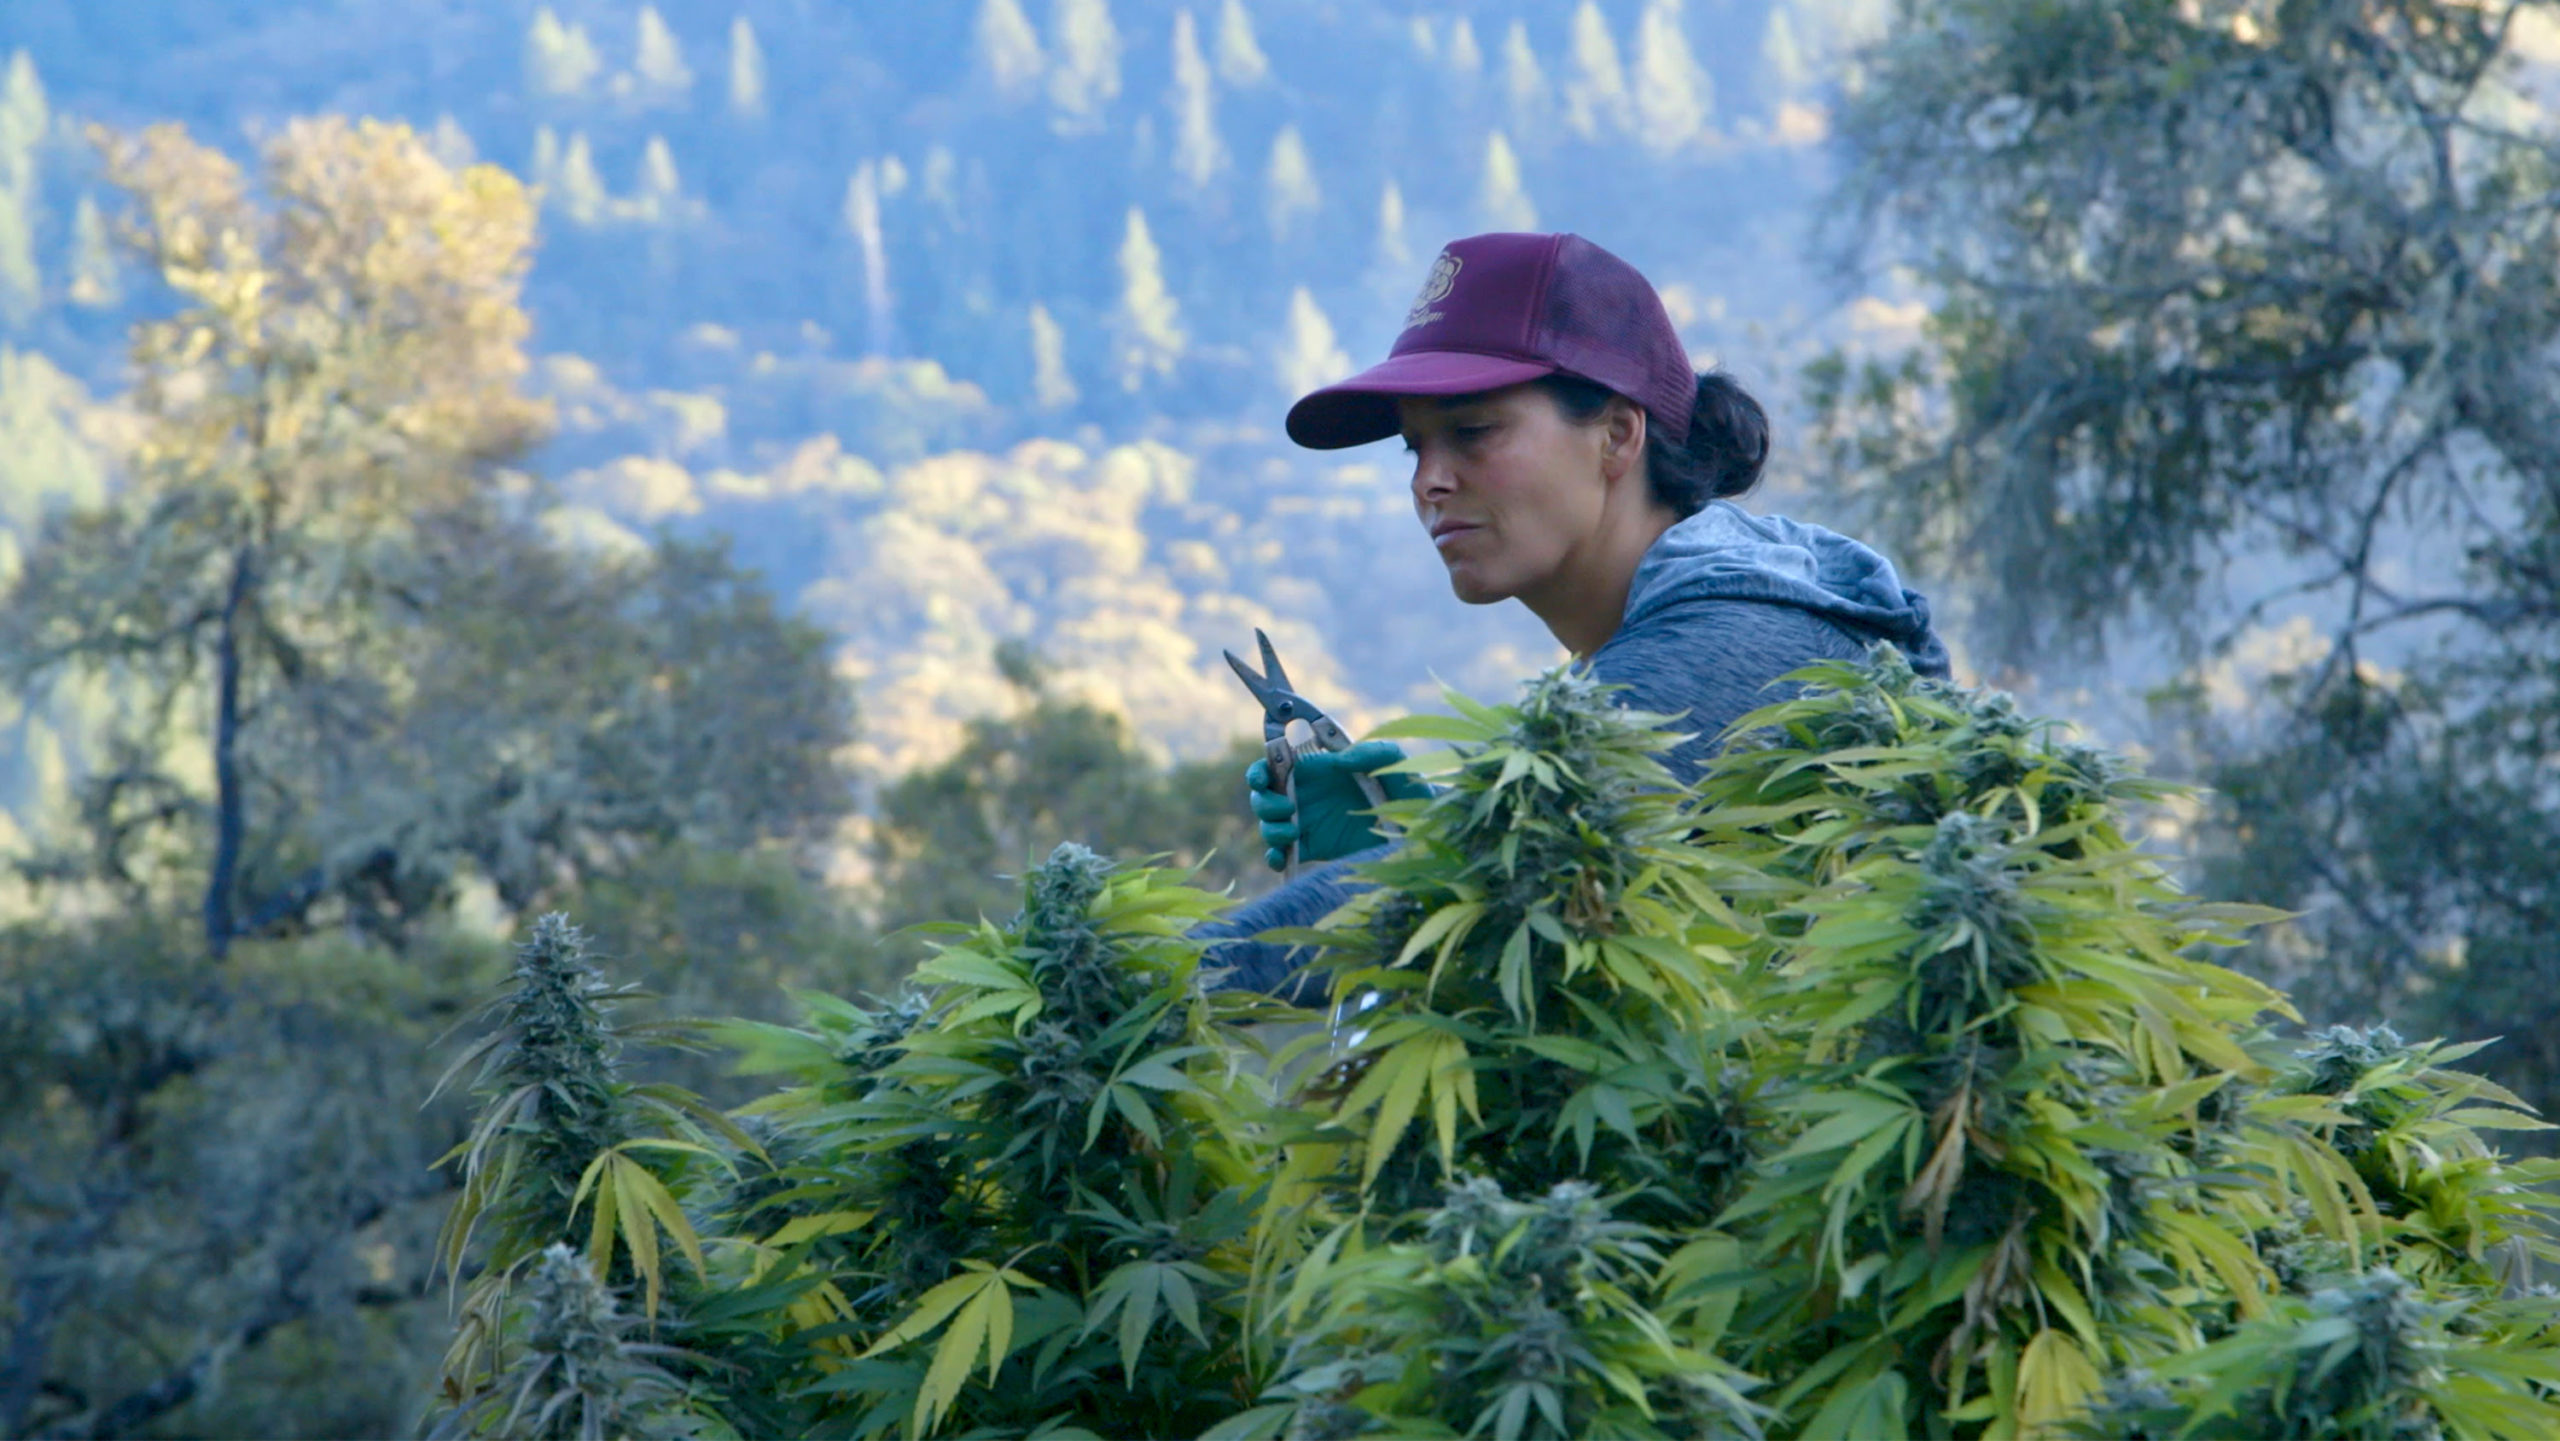 Chris J. Russo, Chiah Rodriques and Sue Taylor on Female Marijuana Pioneers in Lady Buds [Exclusive Interview]